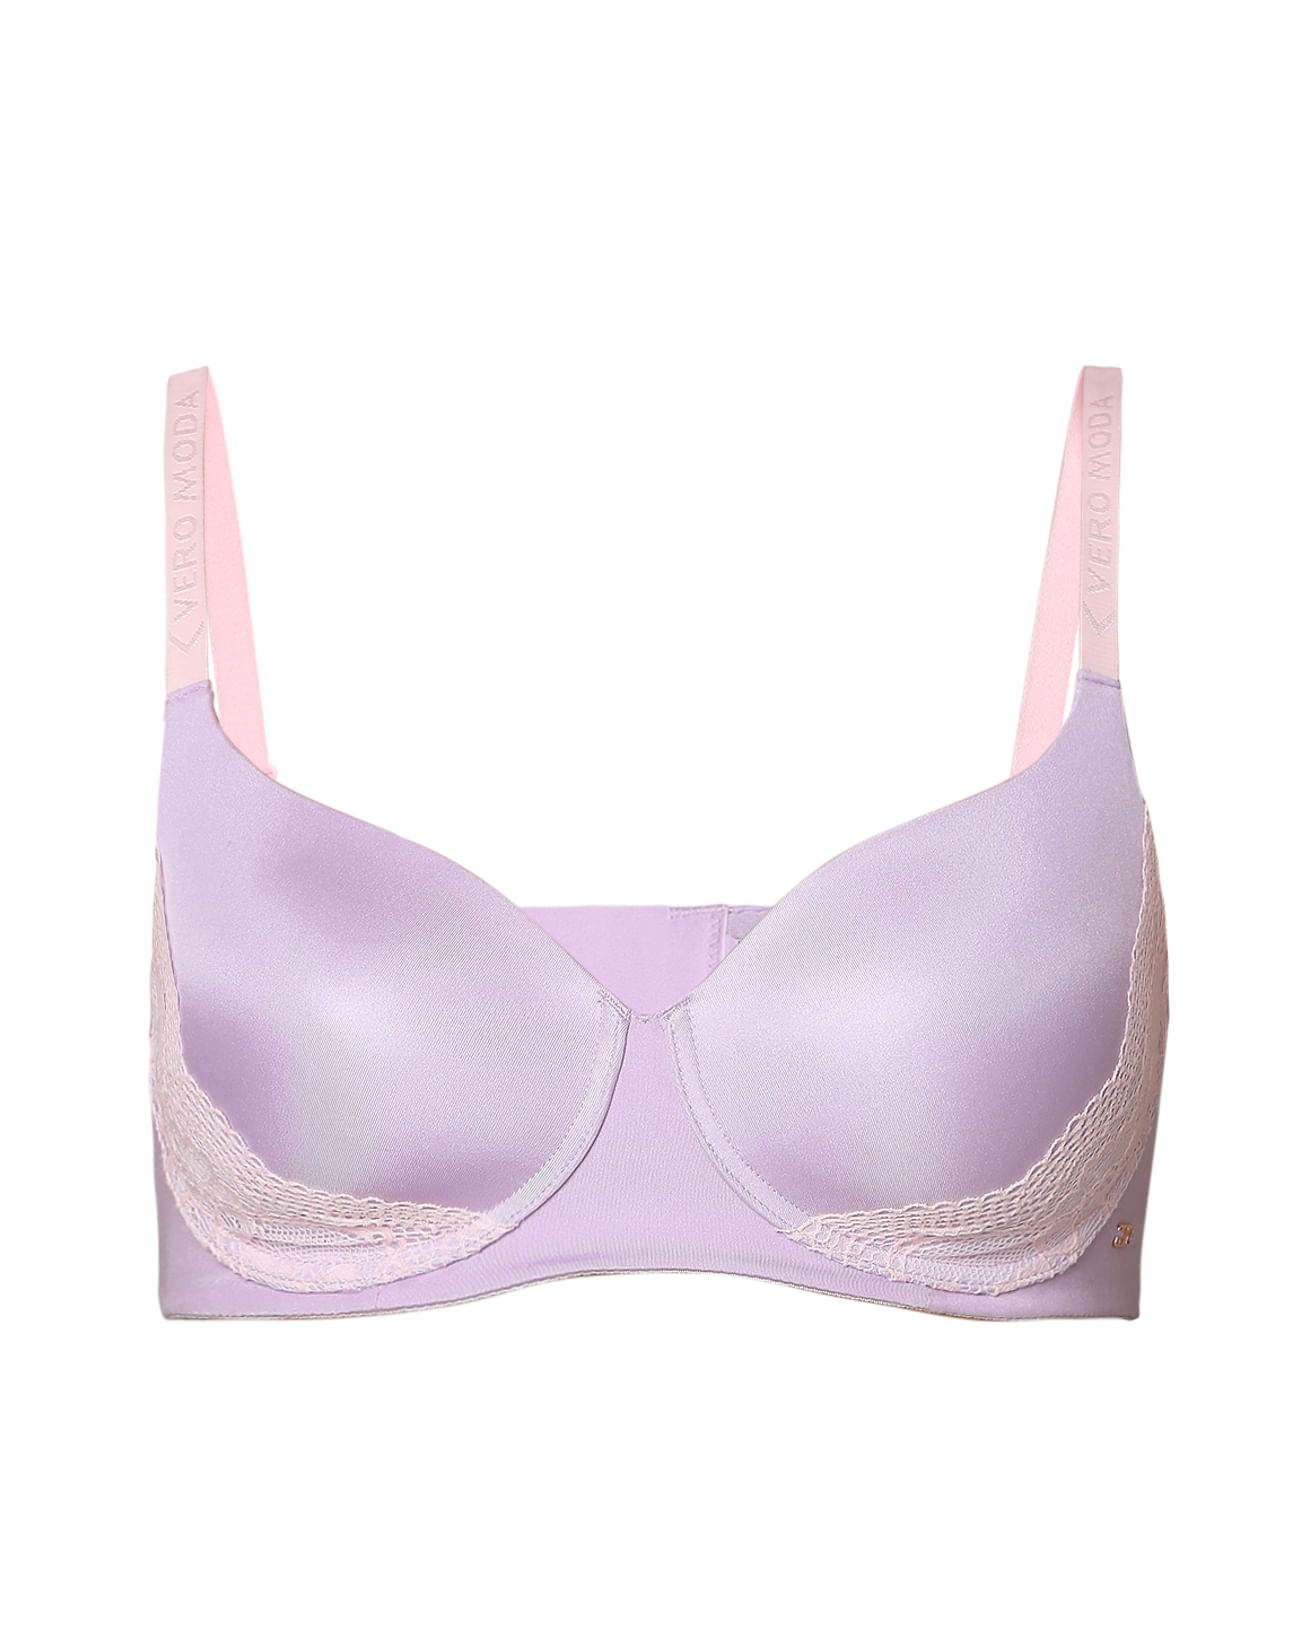 INTIMATES Lavender Padded Non-Wired T-shirt Bra|167642504